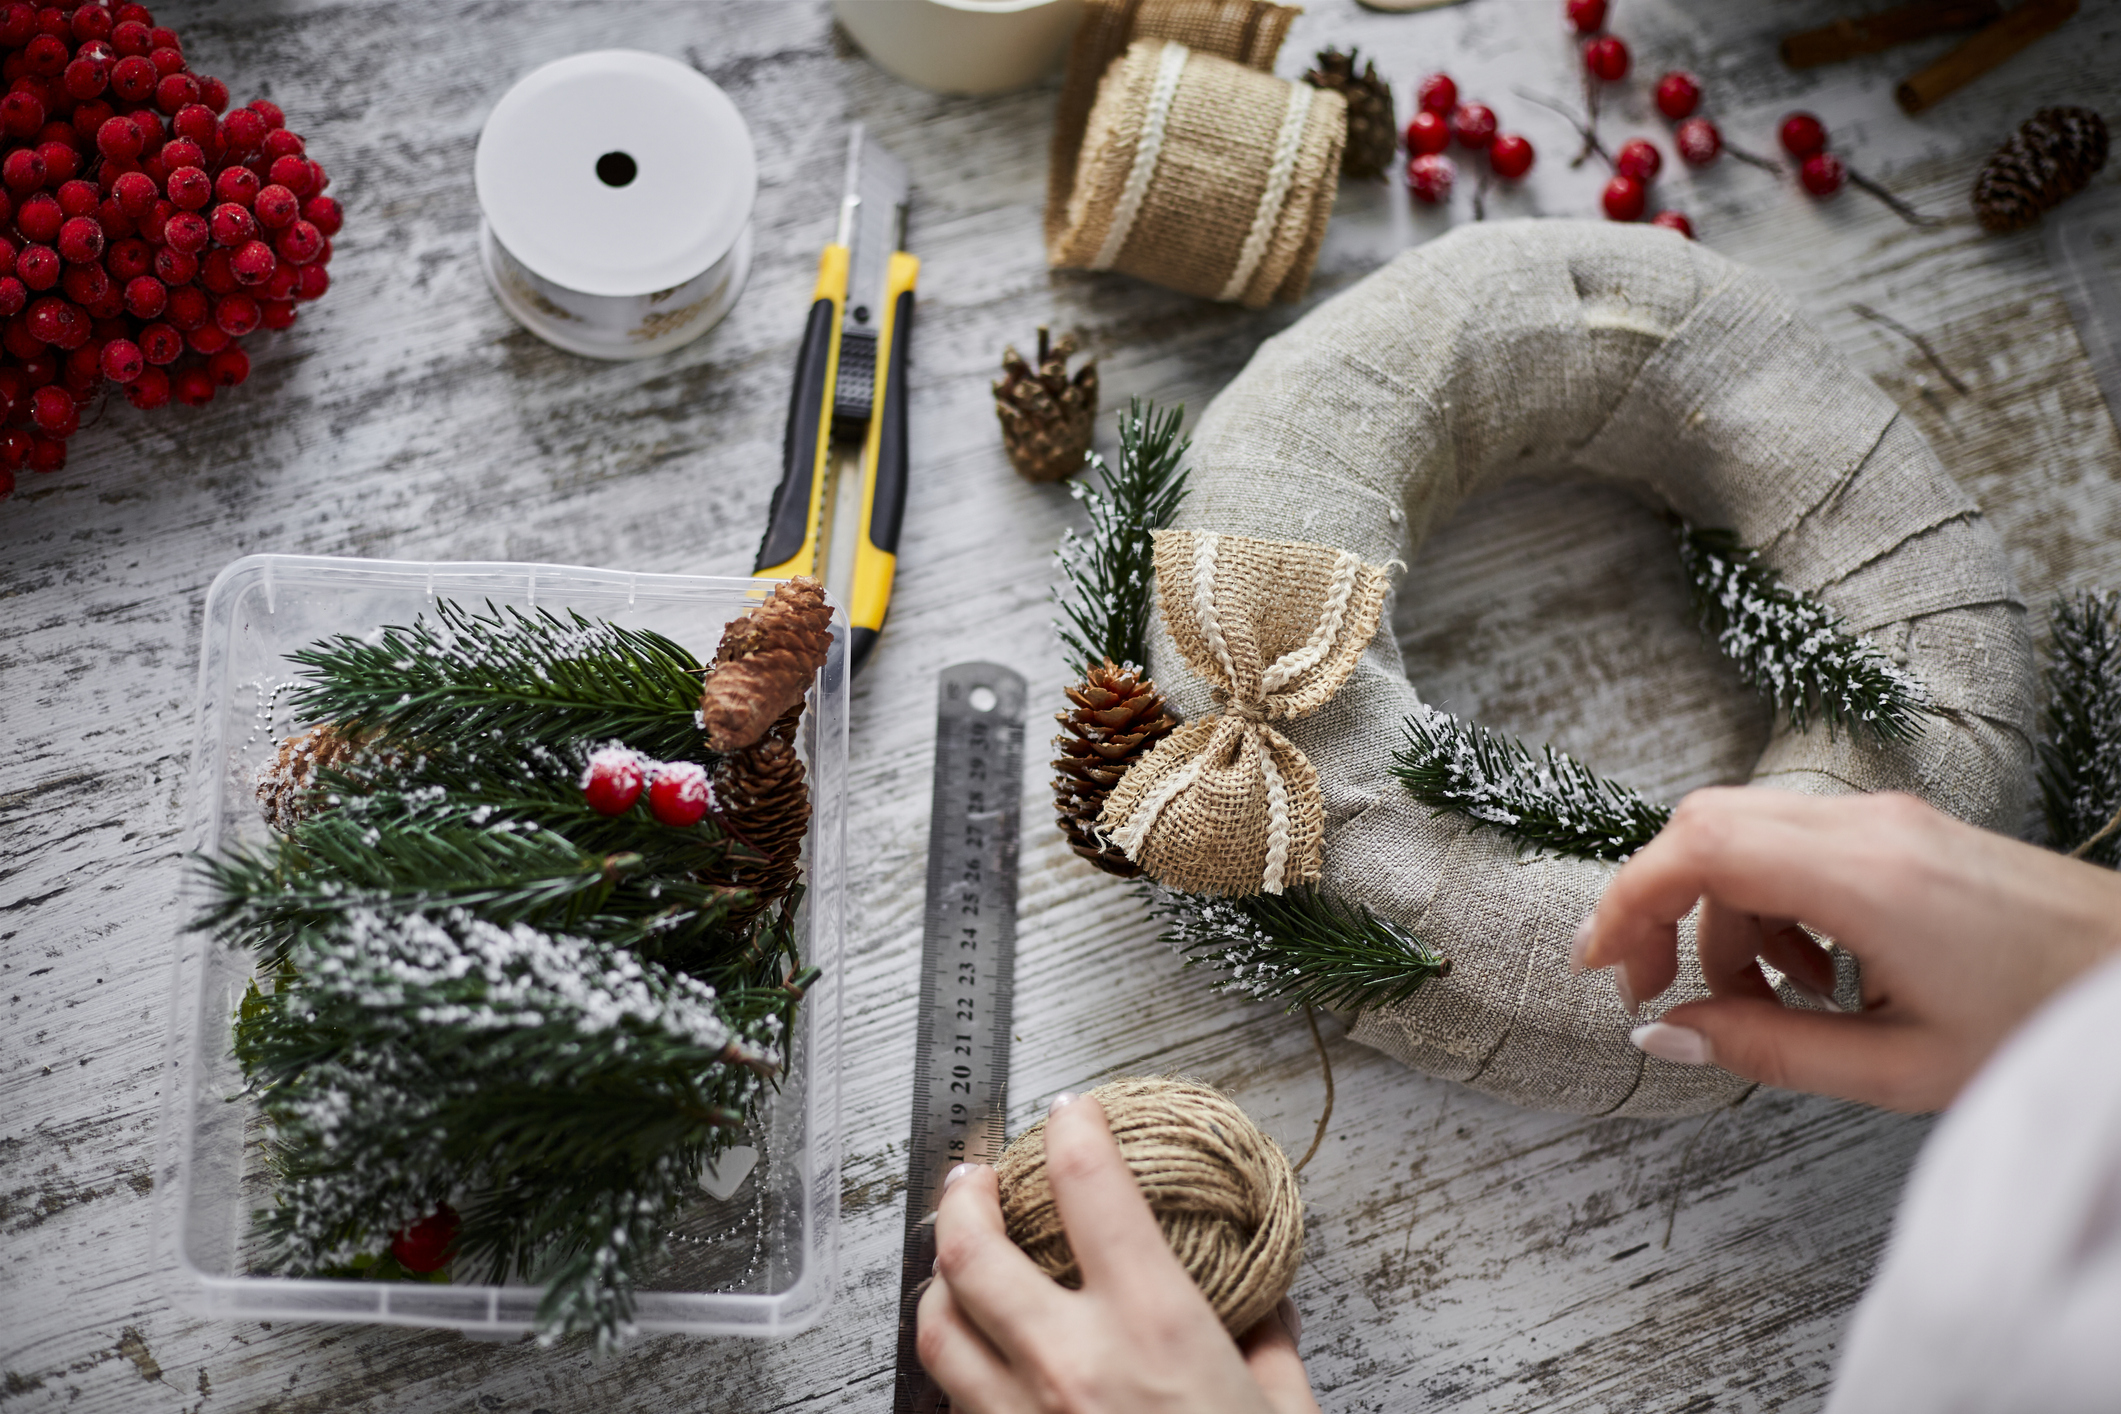 Need a new Christmas wreath? Why not make one on the North Fork